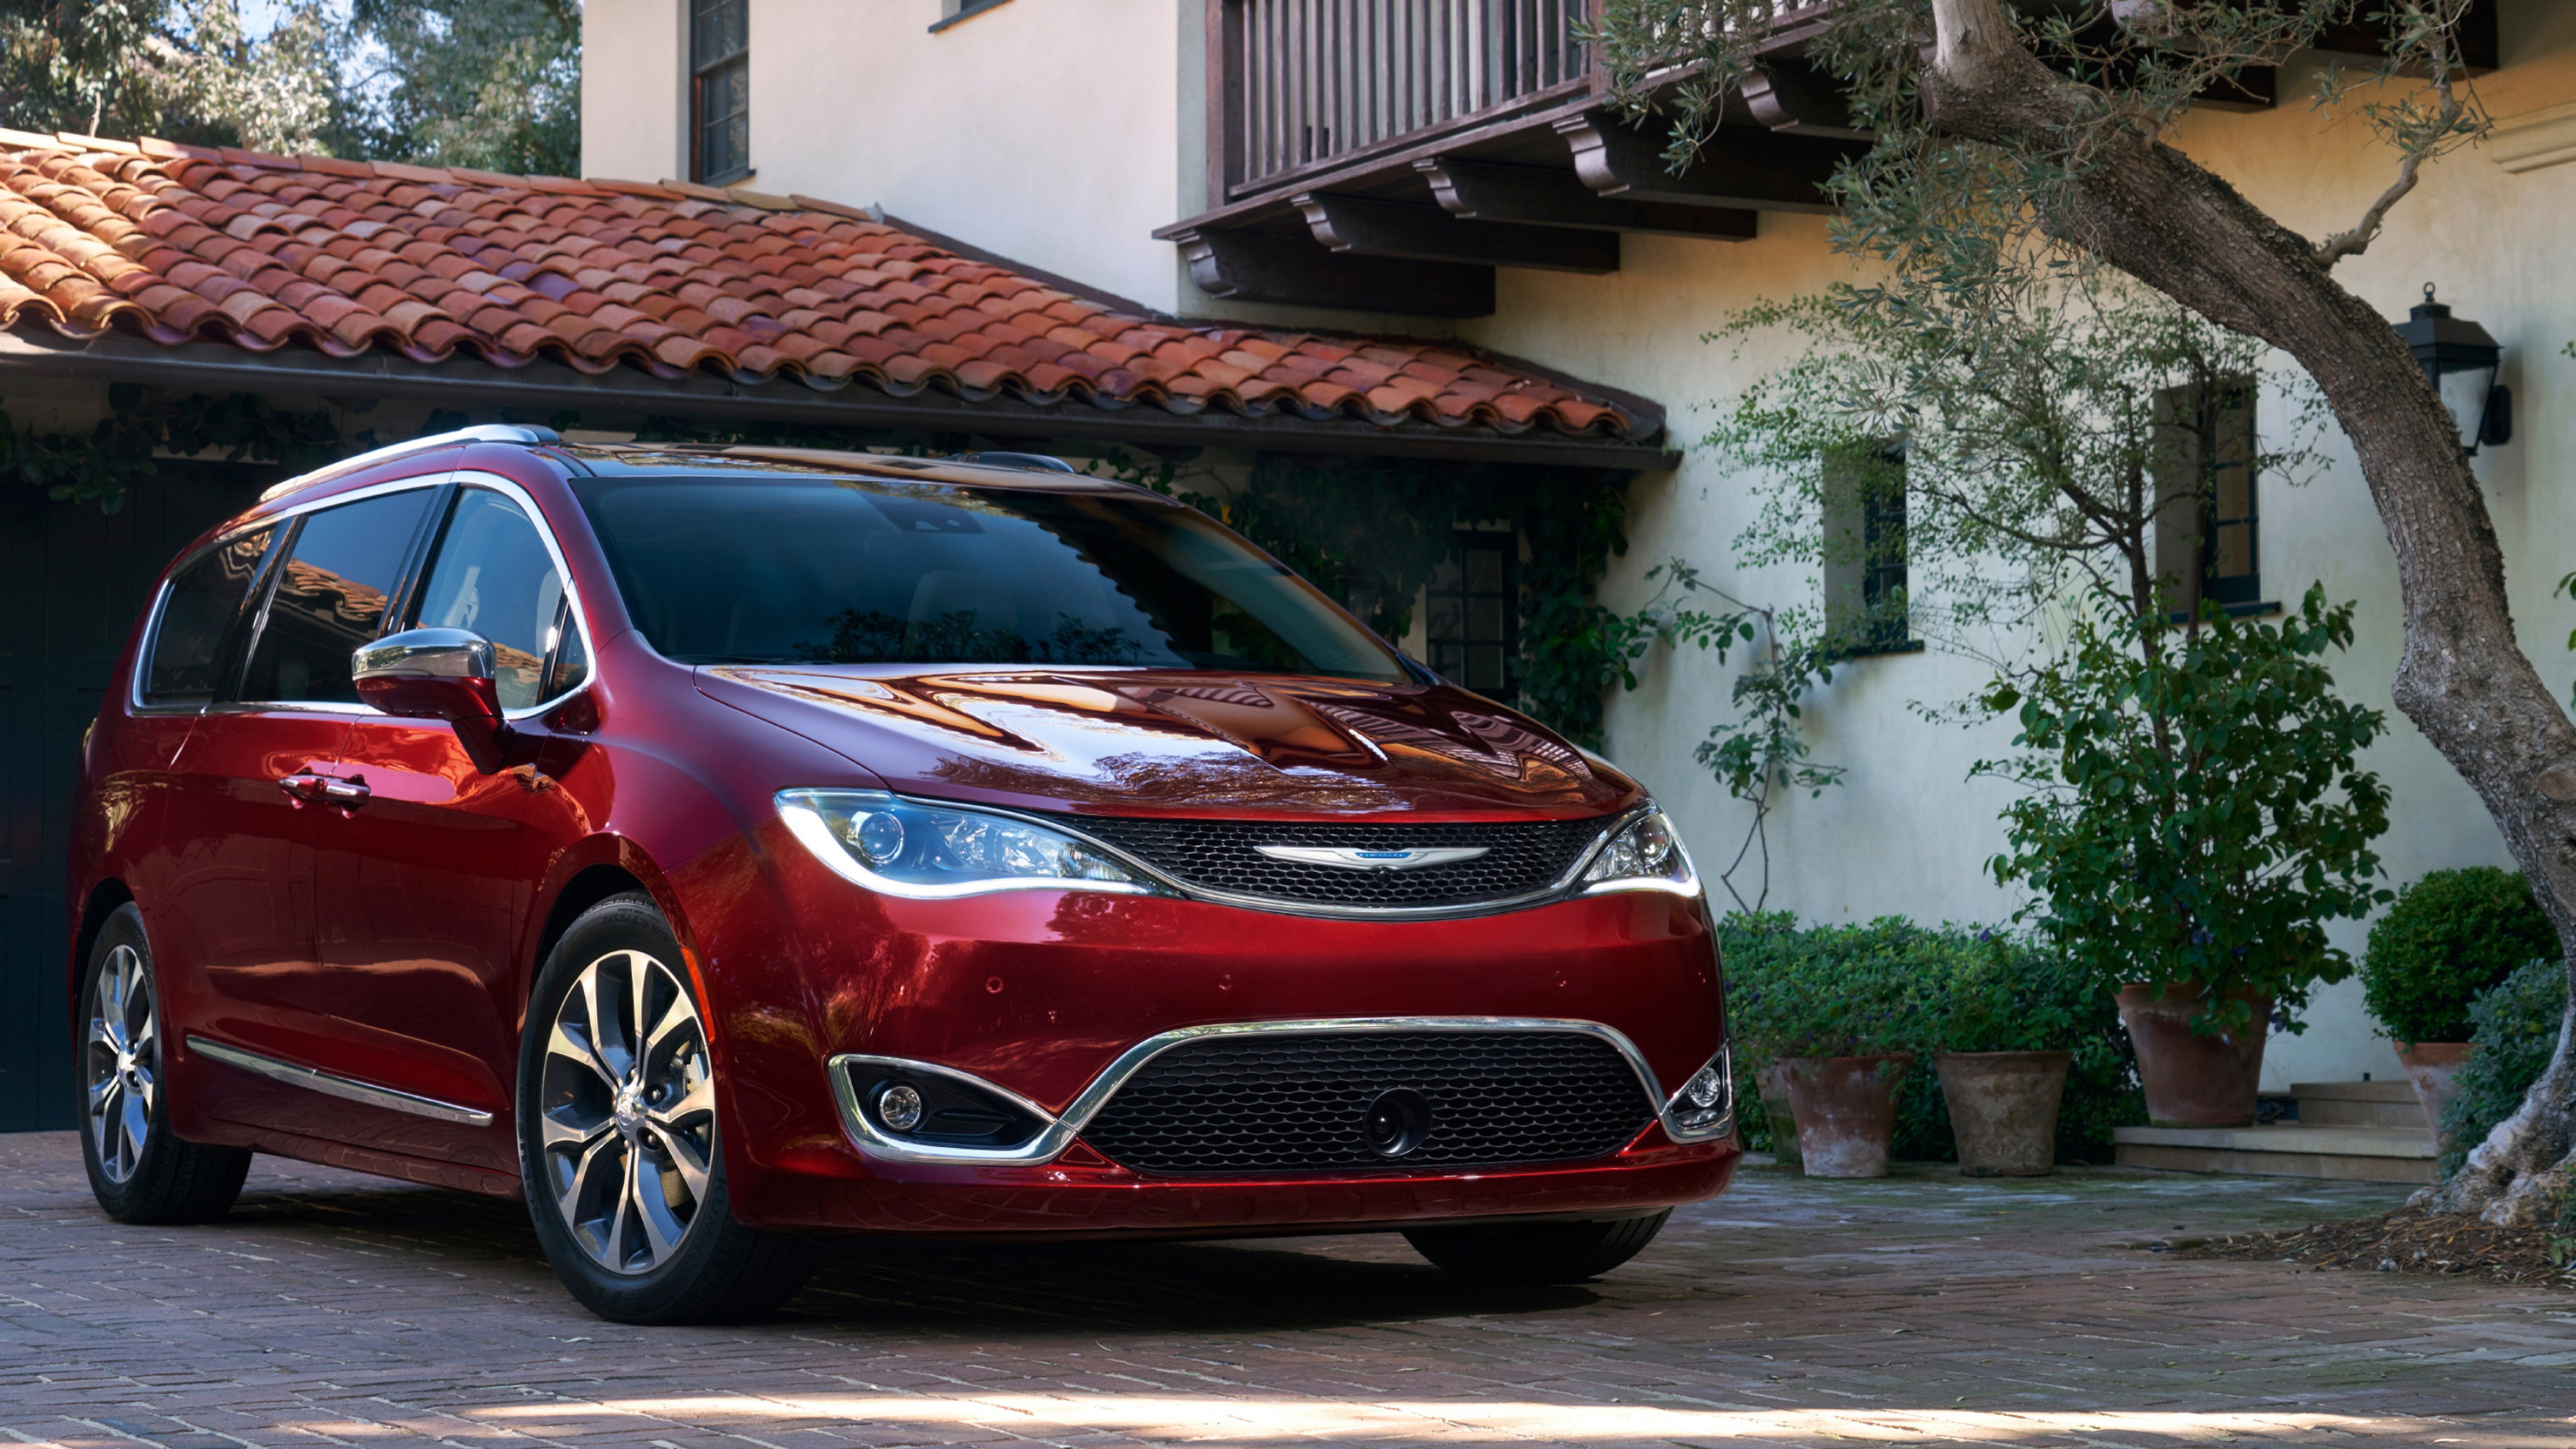 Chrysler Pacifica, Family car, Stylish design, State-of-the-art features, 3840x2160 4K Desktop